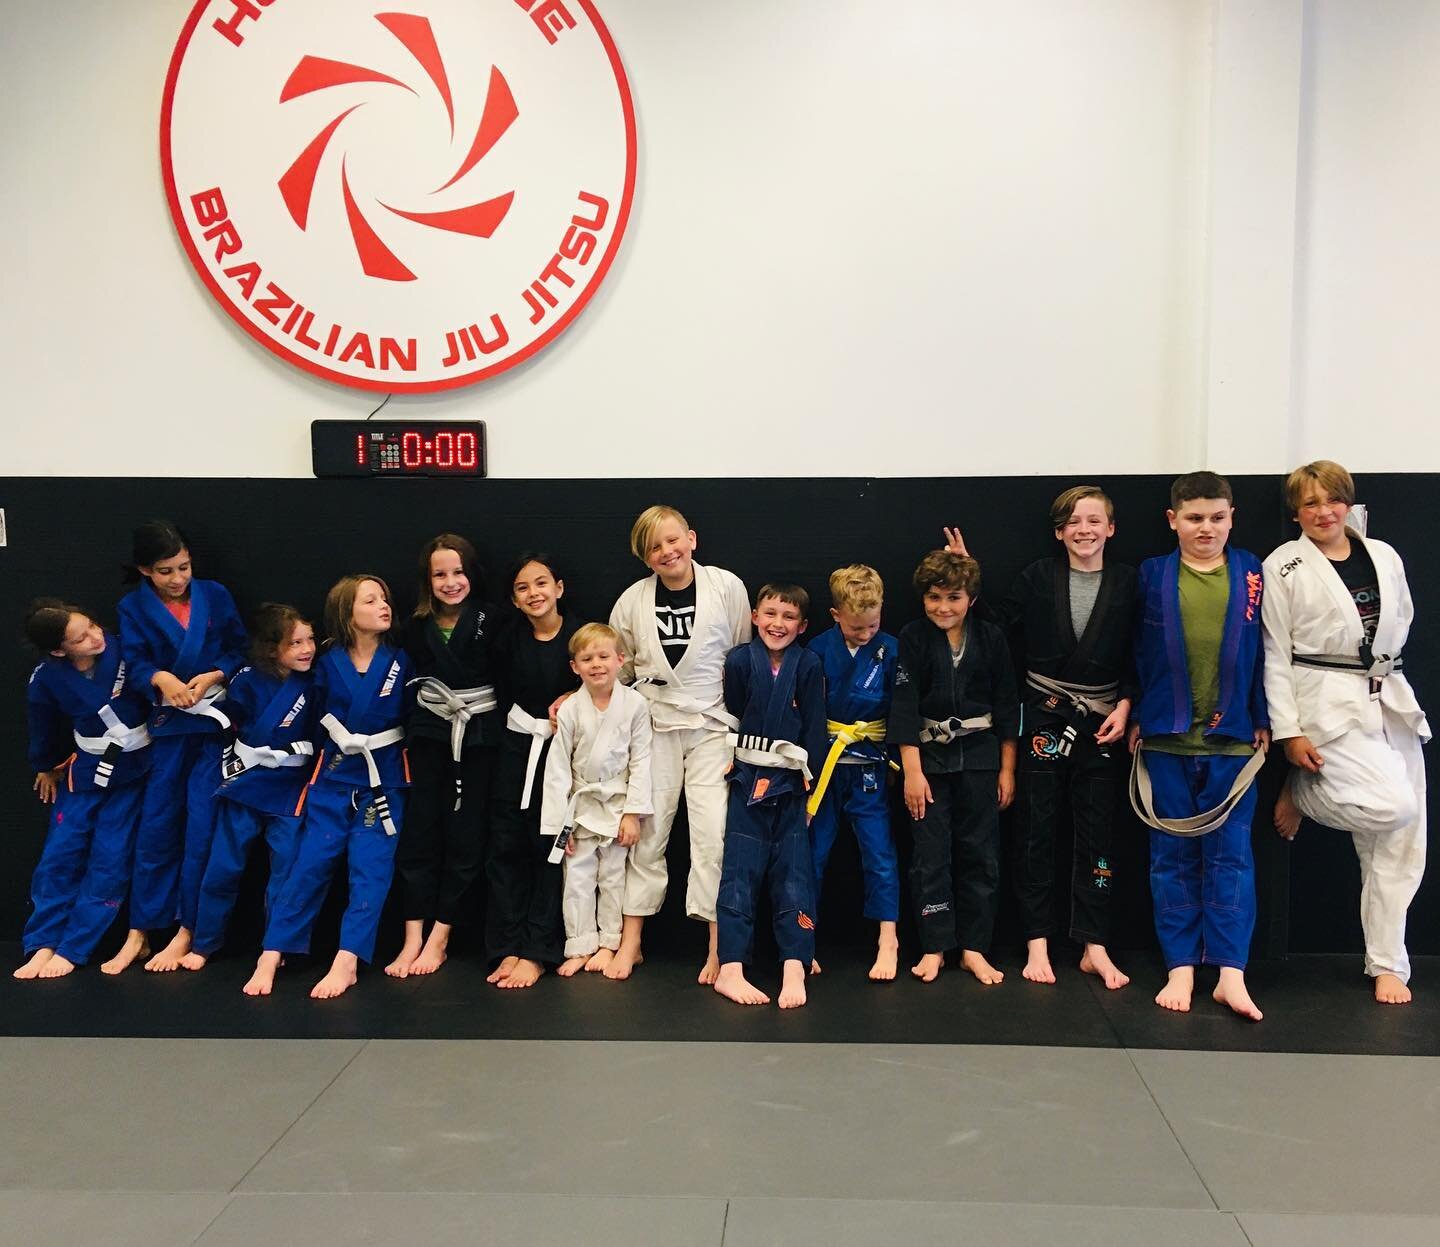 Kids are awesome. Bring them to the mats 5-6p, Mon-Thurs. We&rsquo;ll make sure they have fun while learning serious things. #bjj #jiujitsu #hurricanekidsjj #selfdefense #fitness #sport #lifeskills #cle #cleveland #westpark